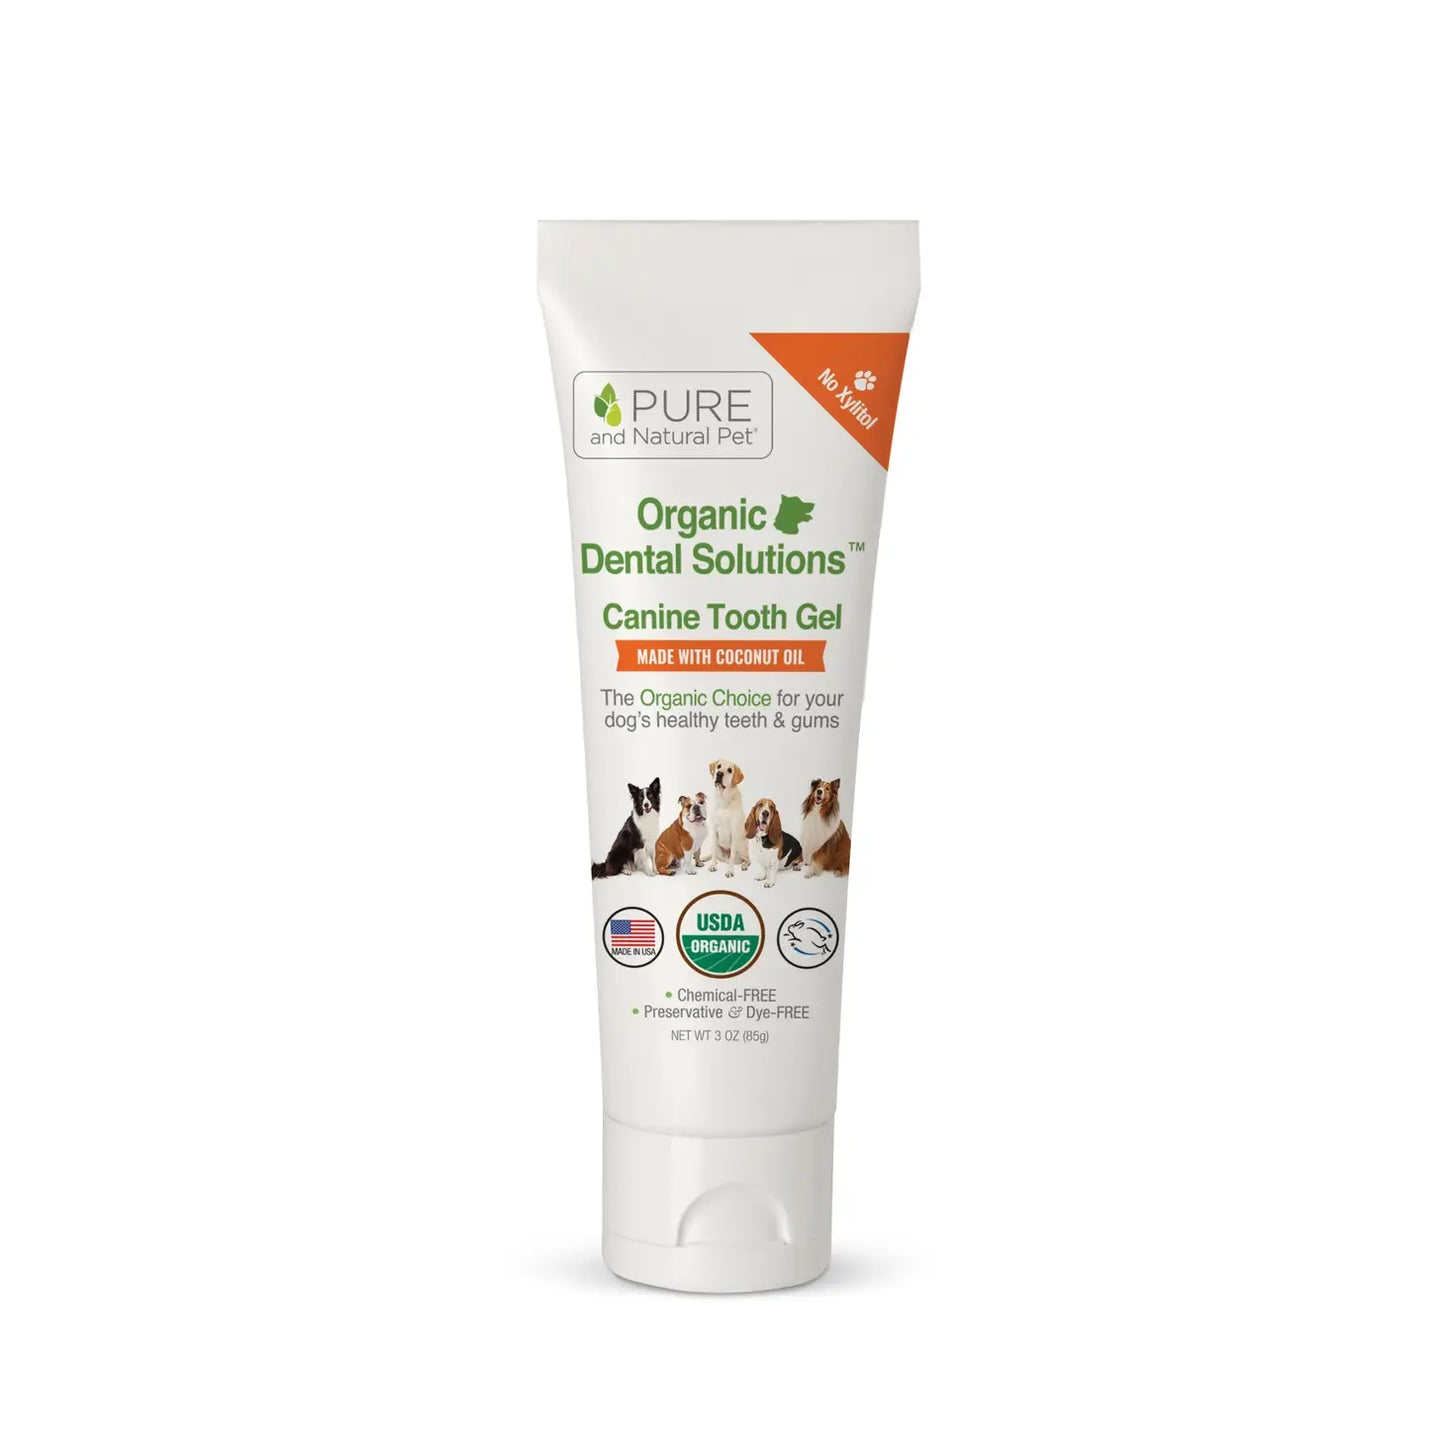 Pure and Natural Pet Organic Dental Solutions Canine Tooth Gel